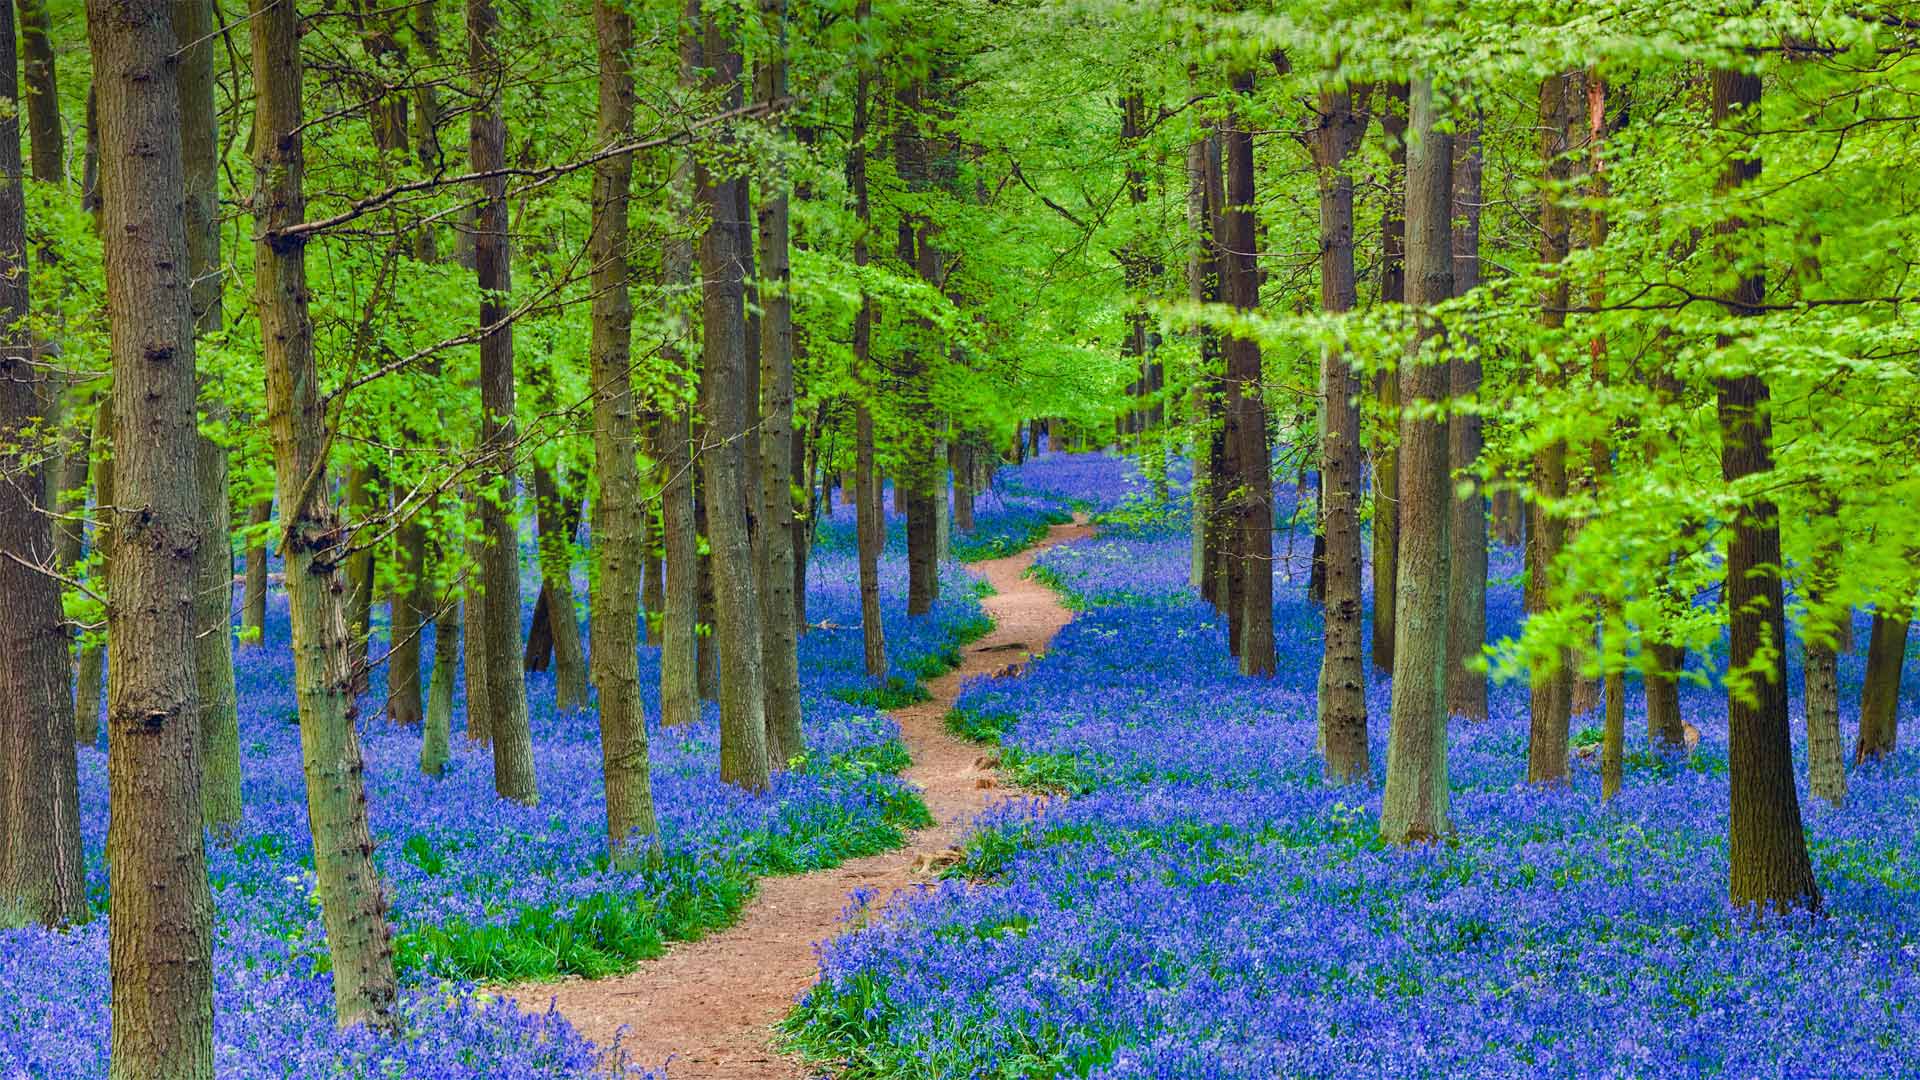 A path winding through a forest carpeted with bluebells in Hertfordshire, England - JayKay57/Getty Images)